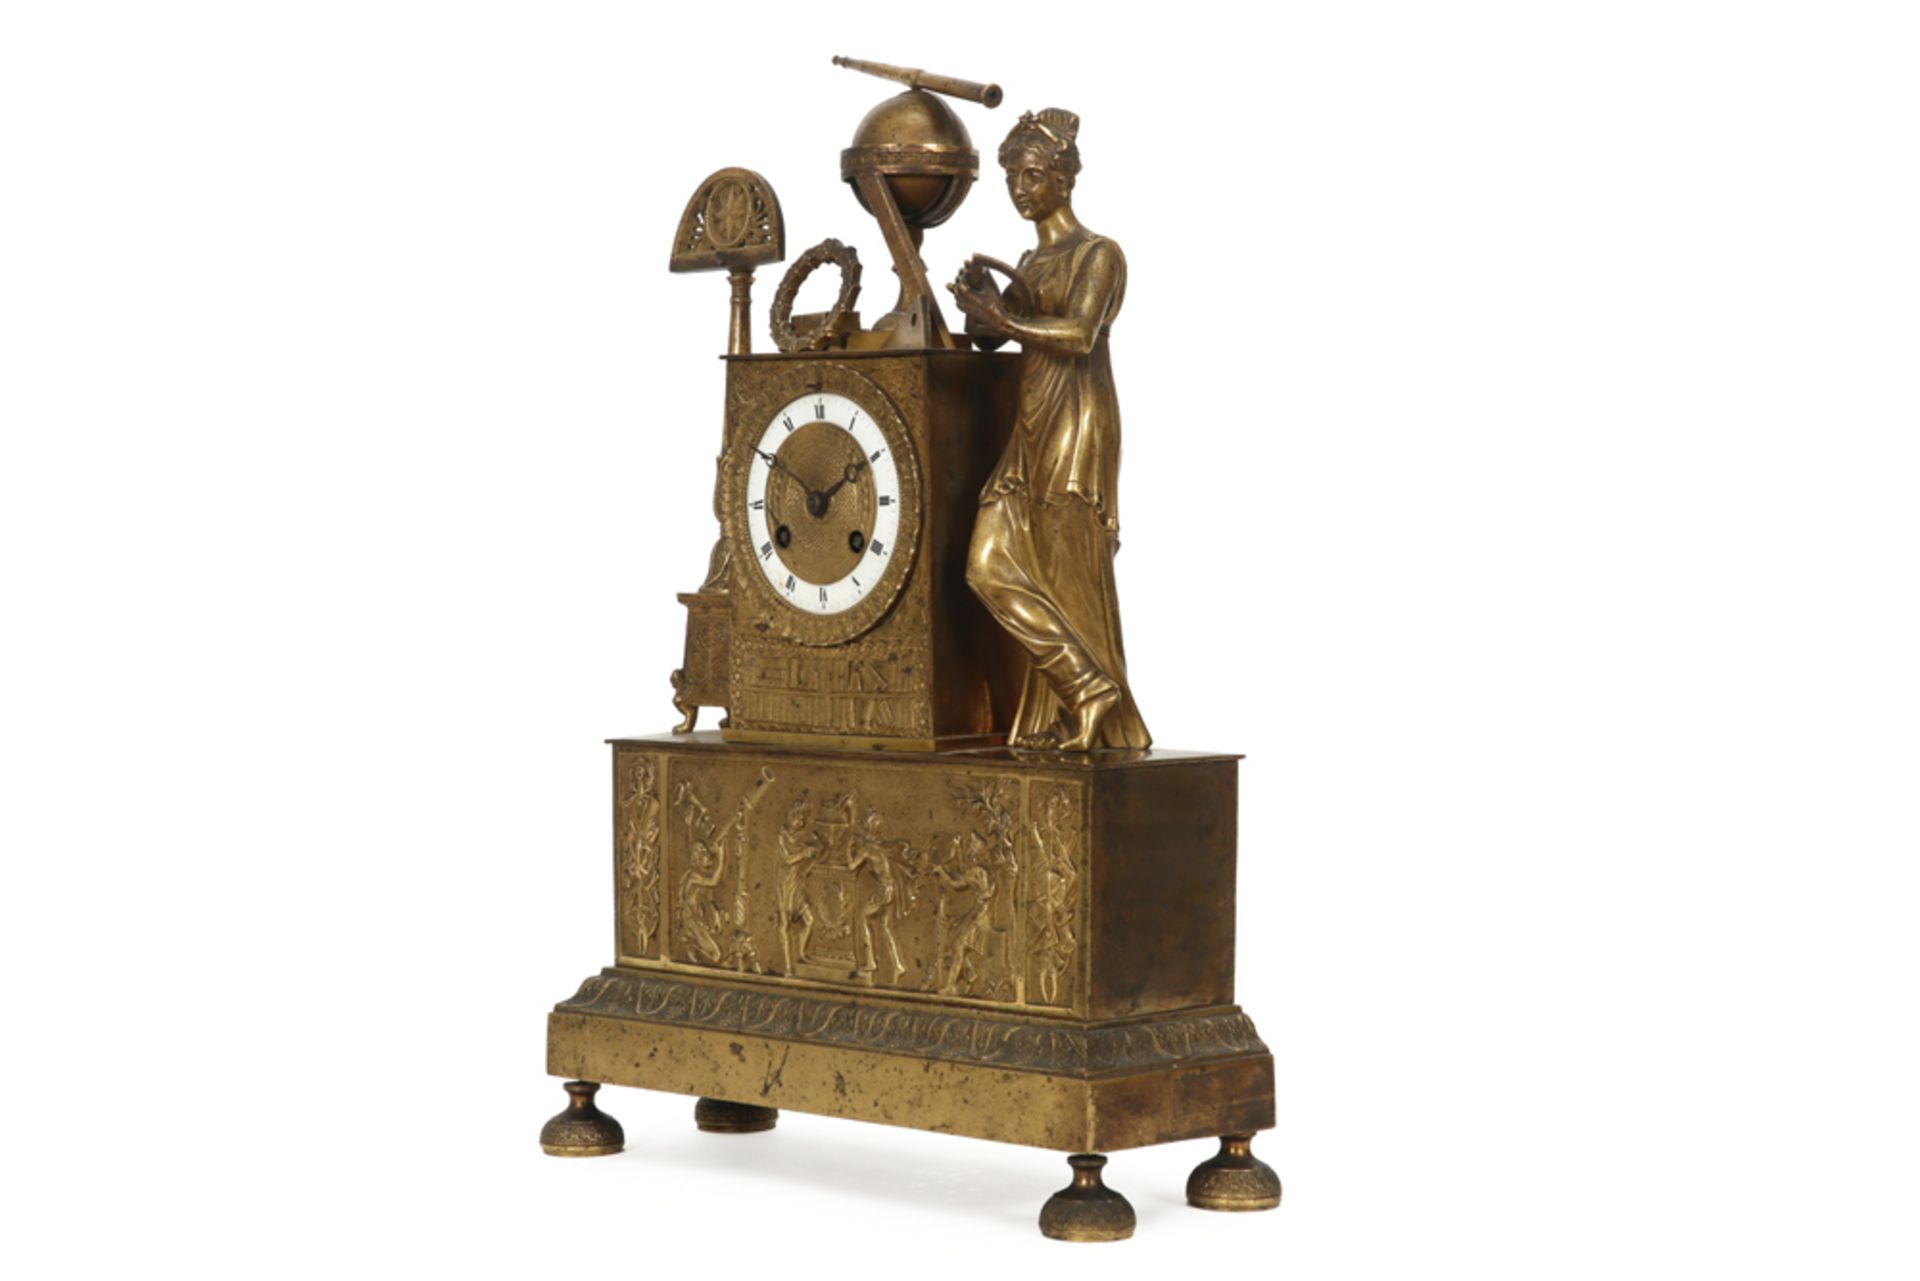 early 19th Cent. Empire style clock with its case in gilded bronze with a lady with all kinds of - Image 3 of 4